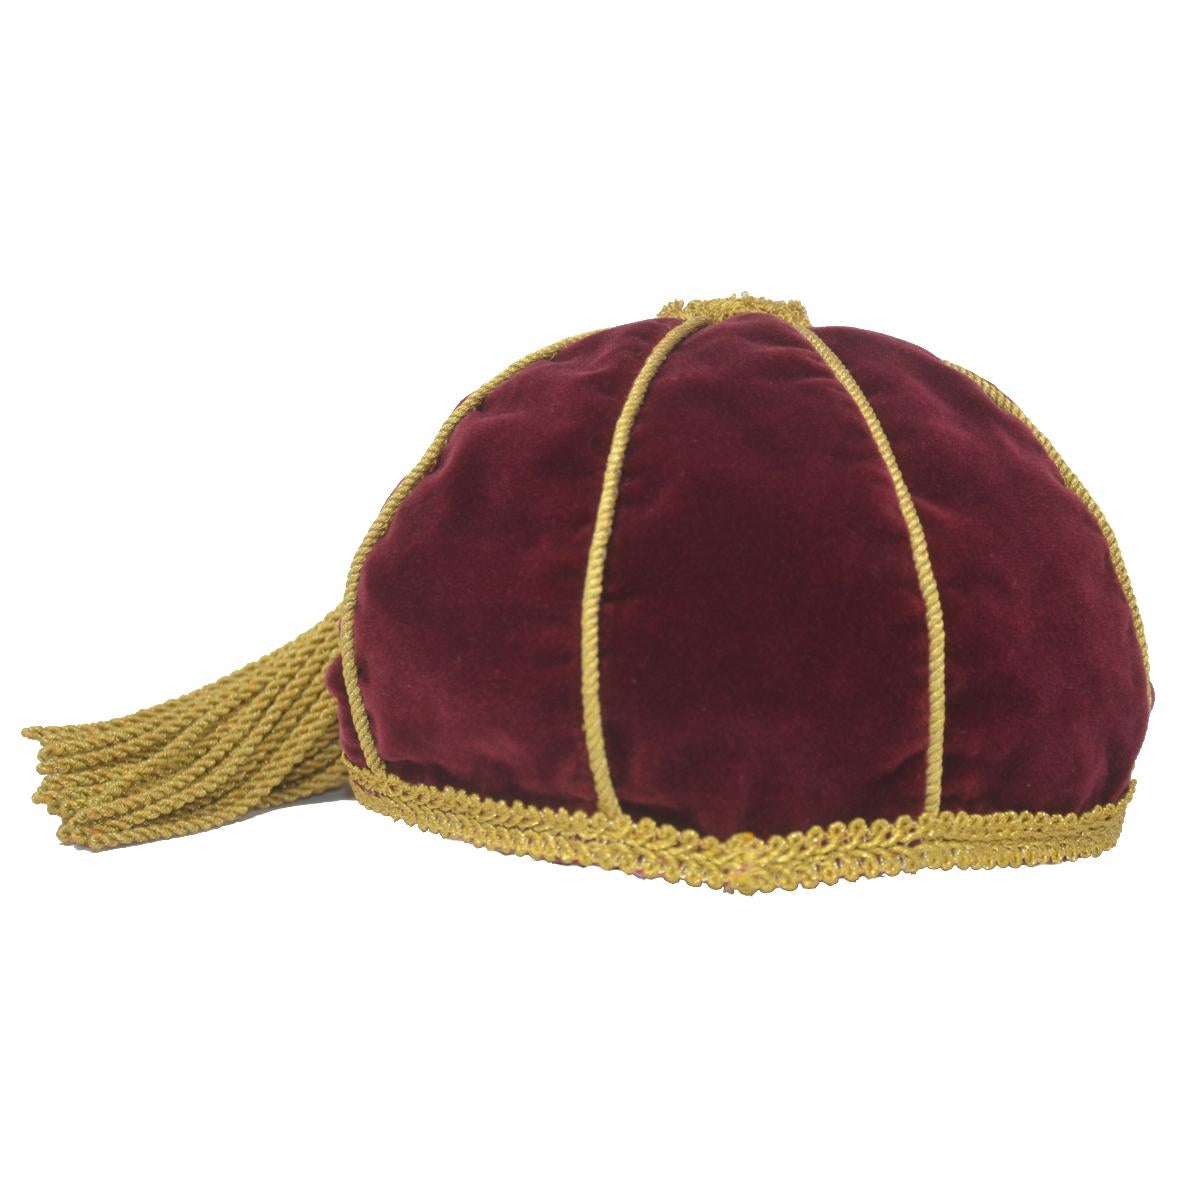 hats with tassels